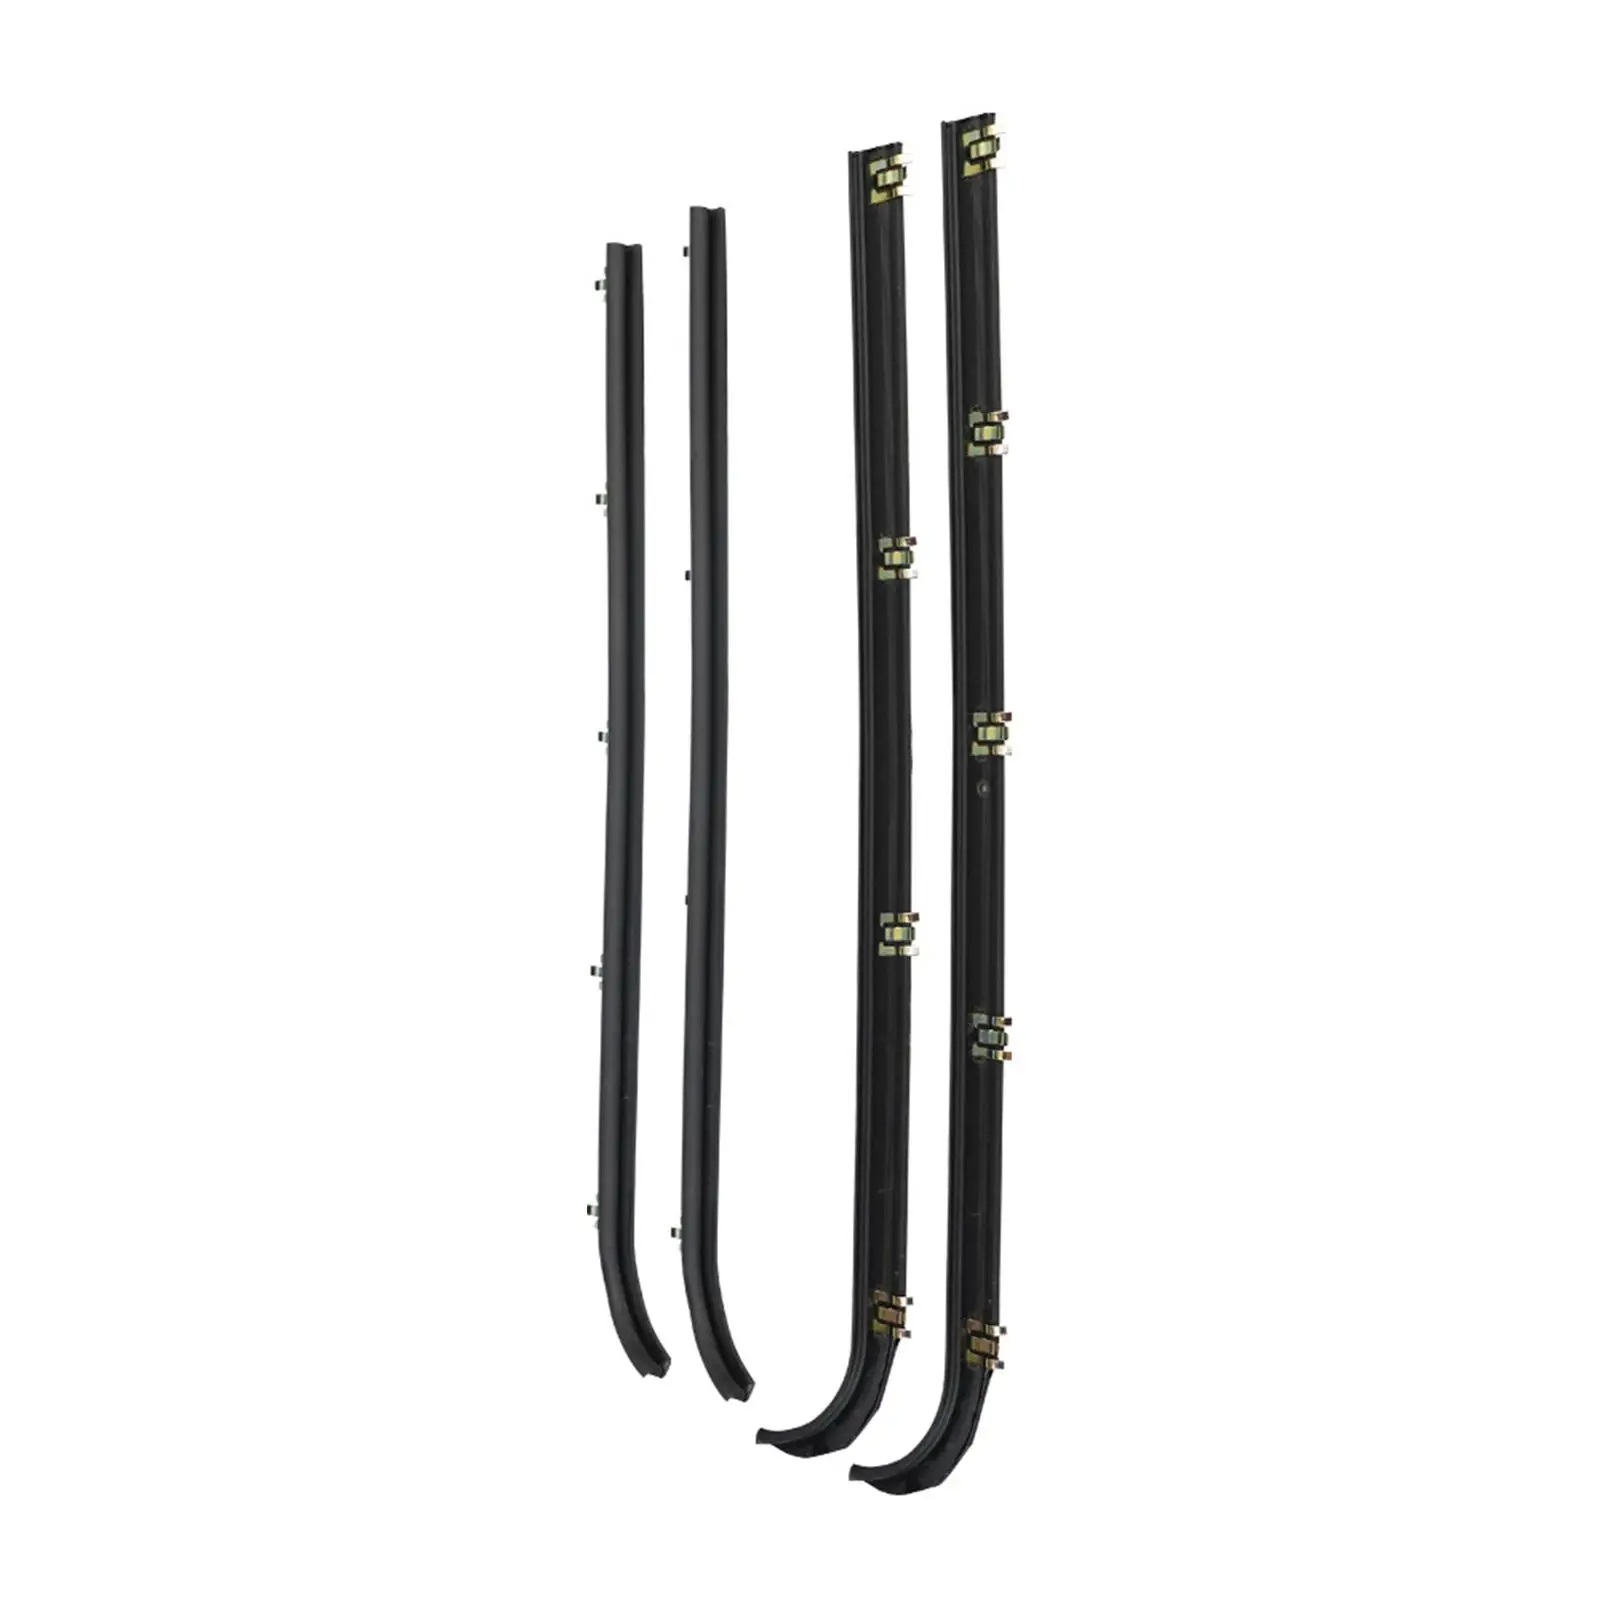 4x Weatherstrip Window Seal Fo1390147 Easy to Install Door Window Weatherstrip Replacements for Ford Bronco 1987 - 1997